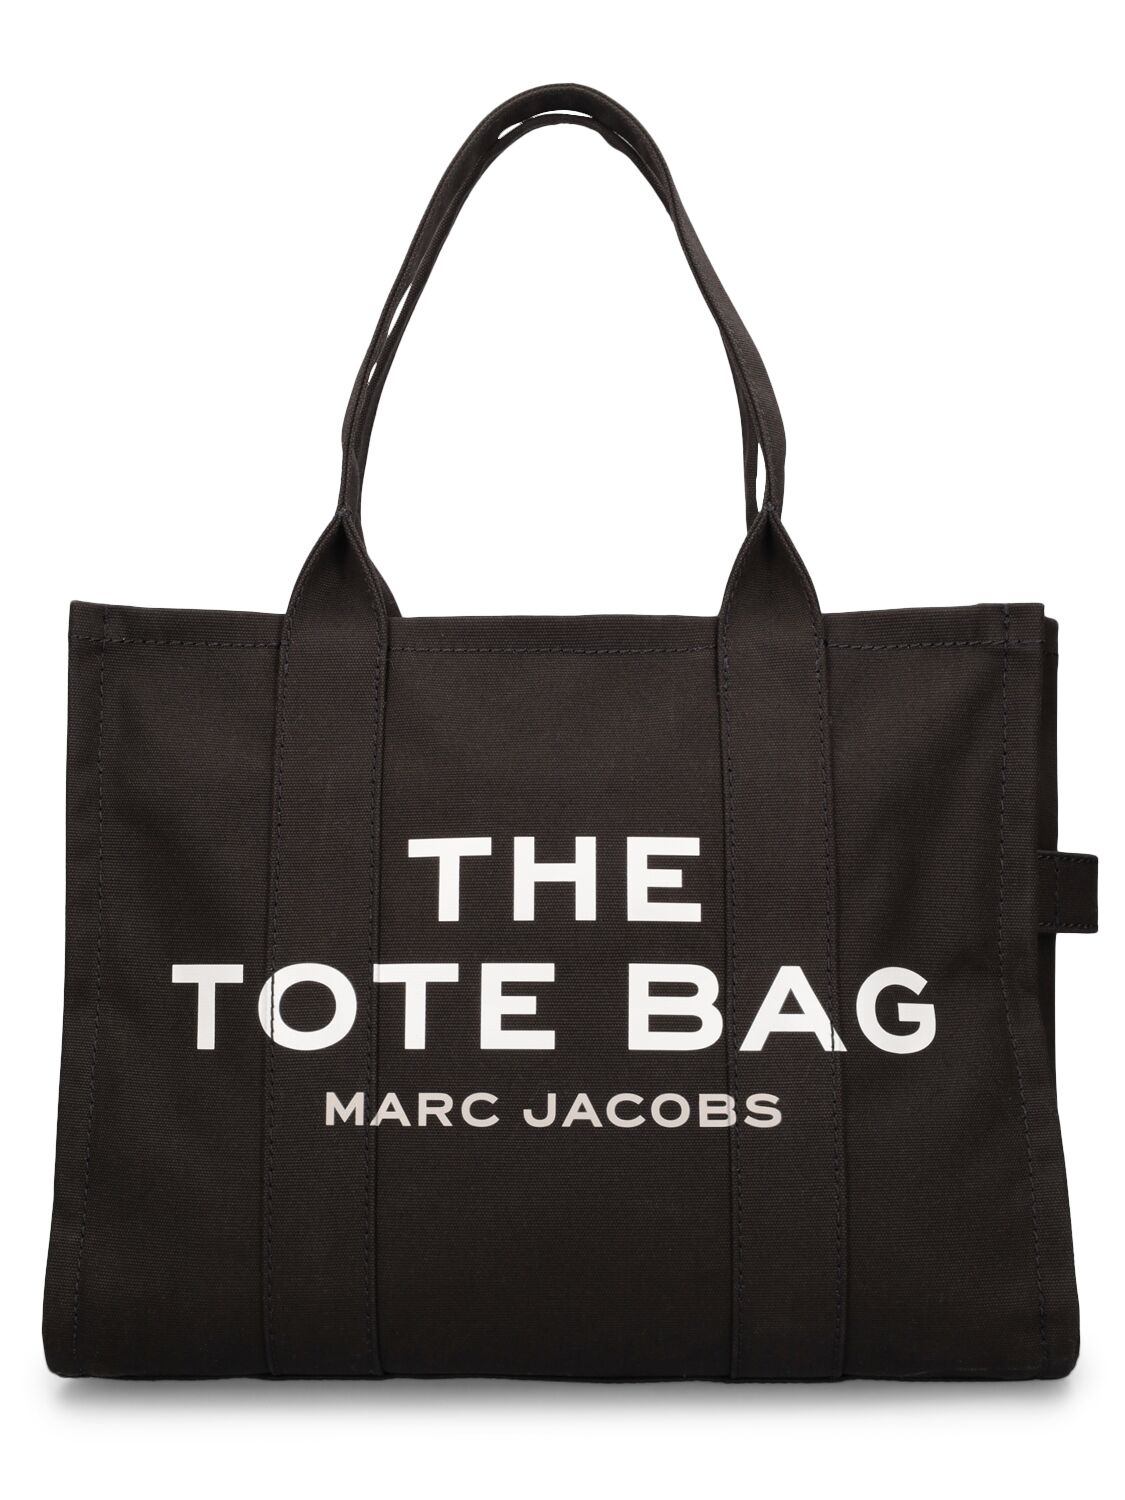 The Large Tote Cotton Bag